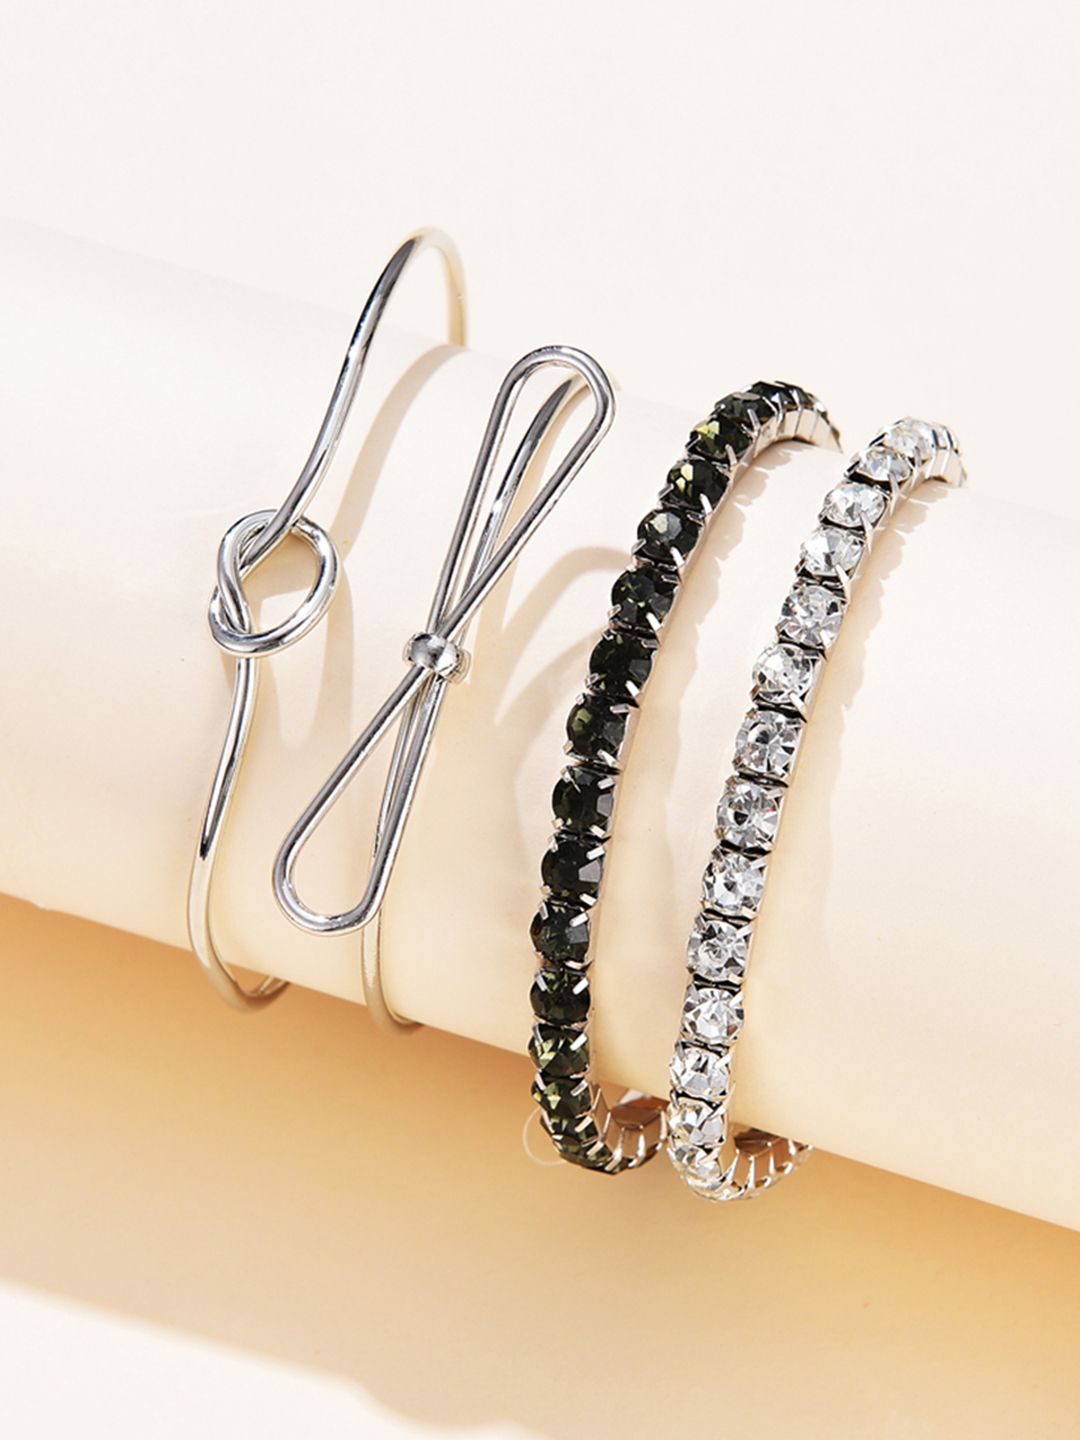 URBANIC Women Set of 4 Silver-Toned & Black Cuffed and Elasticated Bracelet Price in India